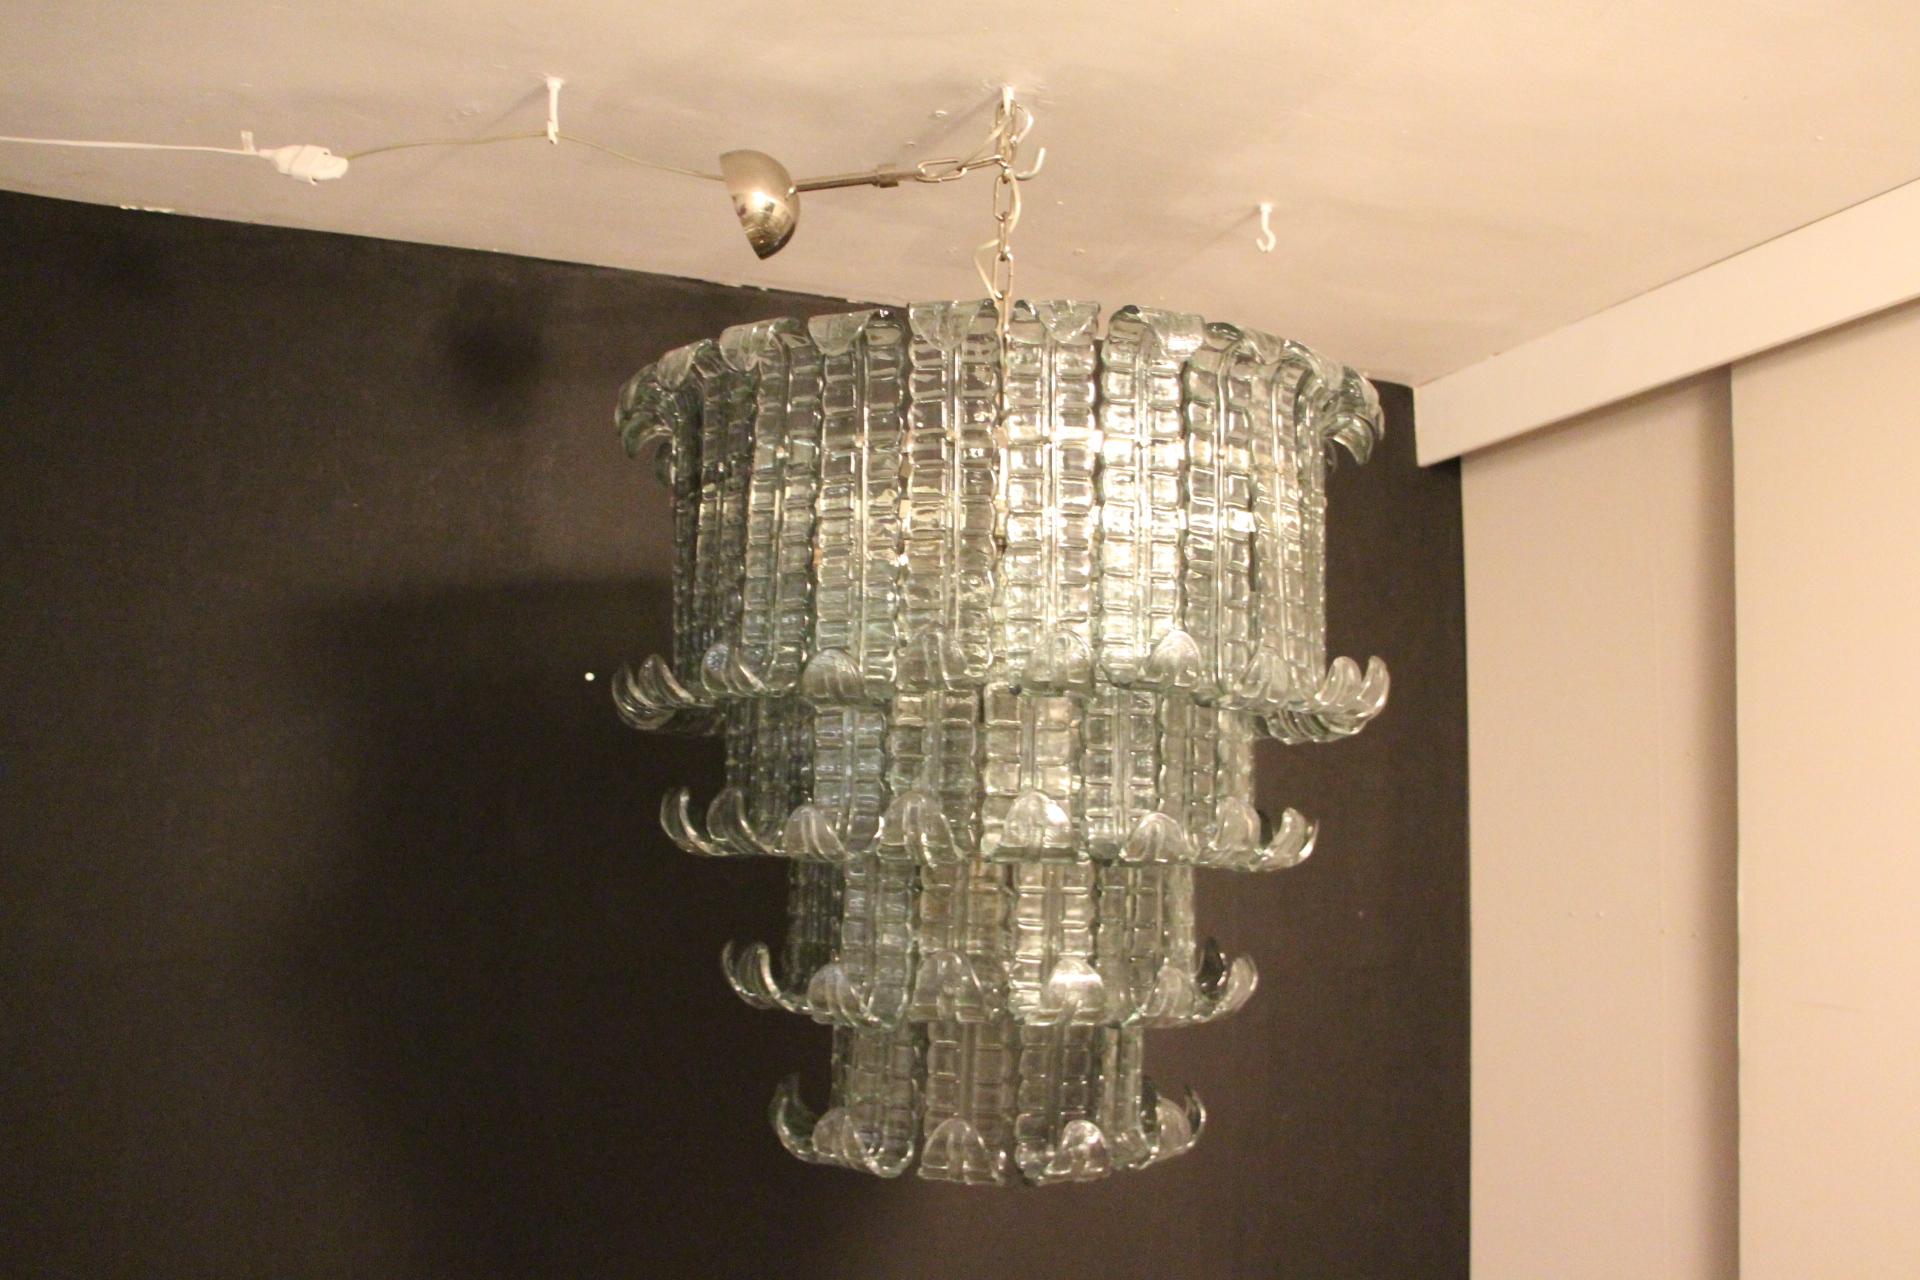 This beautiful chandelier features 71 Murano glass textured palmettes in a Fontana Arte Color going from green to blue .Each piece of glass has been made individually in Murano.
It is a 4 tiers light.
It gives a warm and pleasant light and